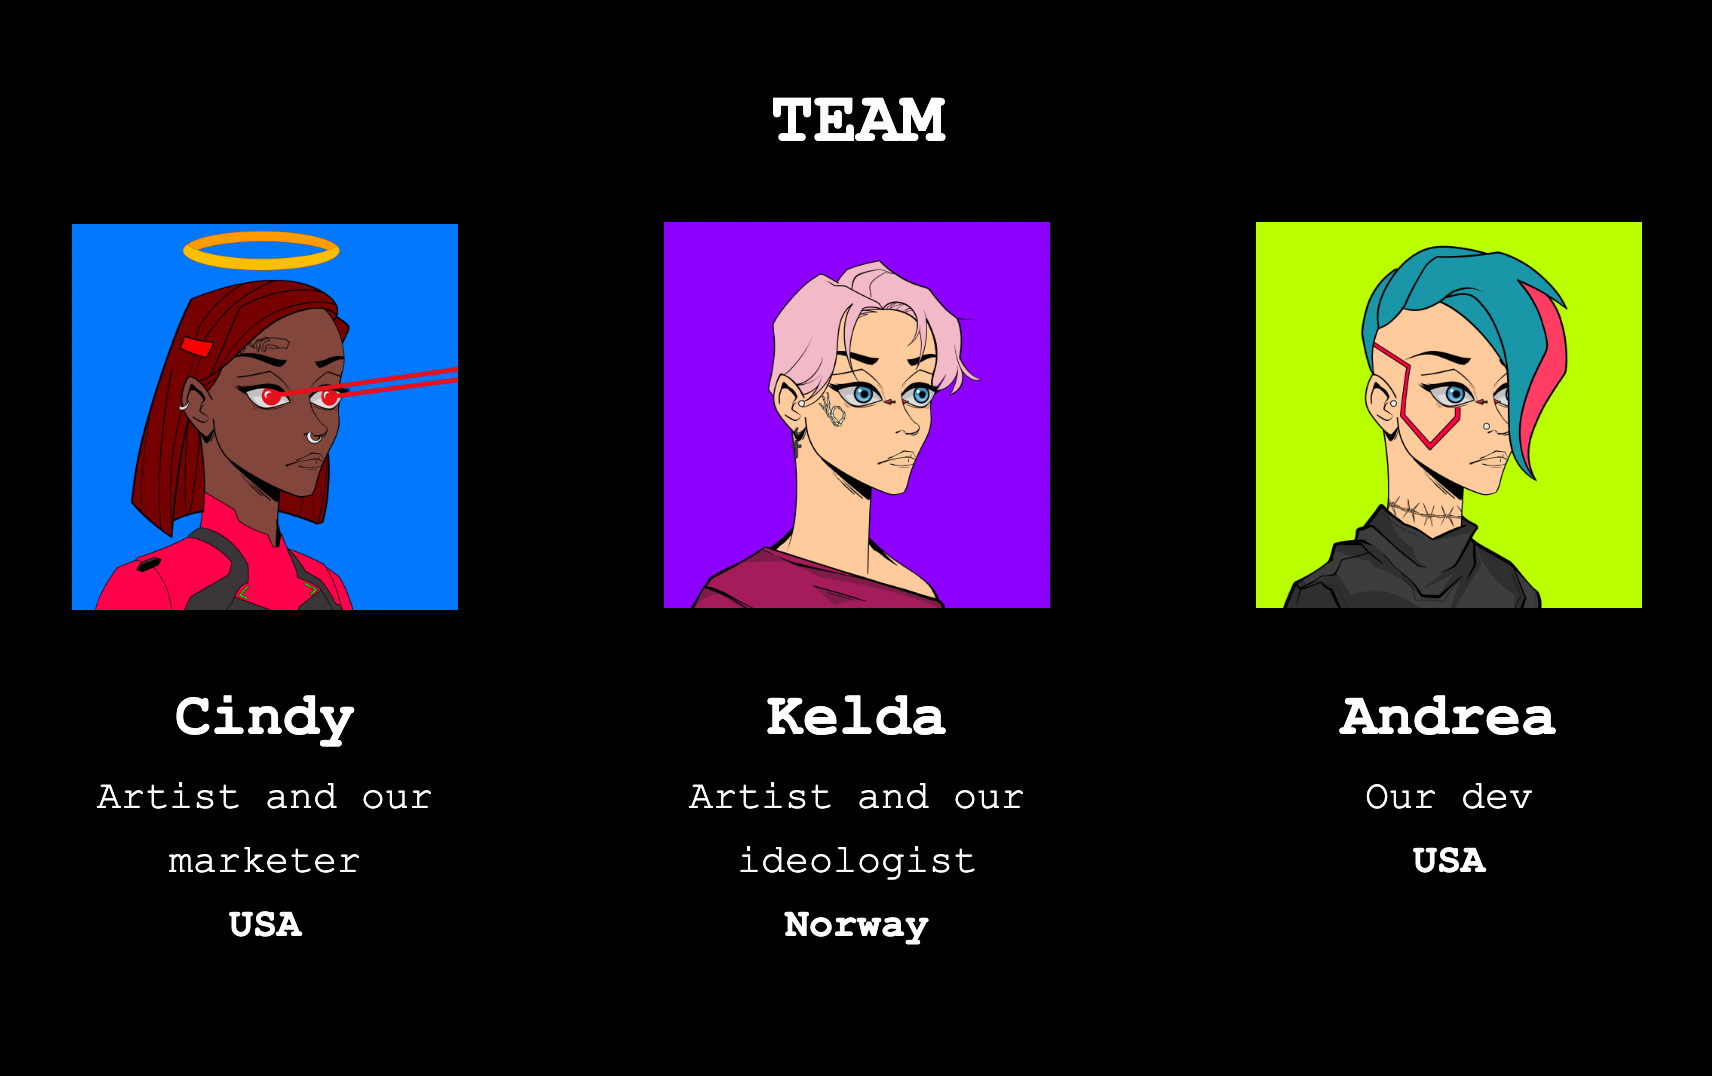 Three illustrations of women, under the heading "Team". The images are labeled with the names Cindy, Kelda, and Andrea.